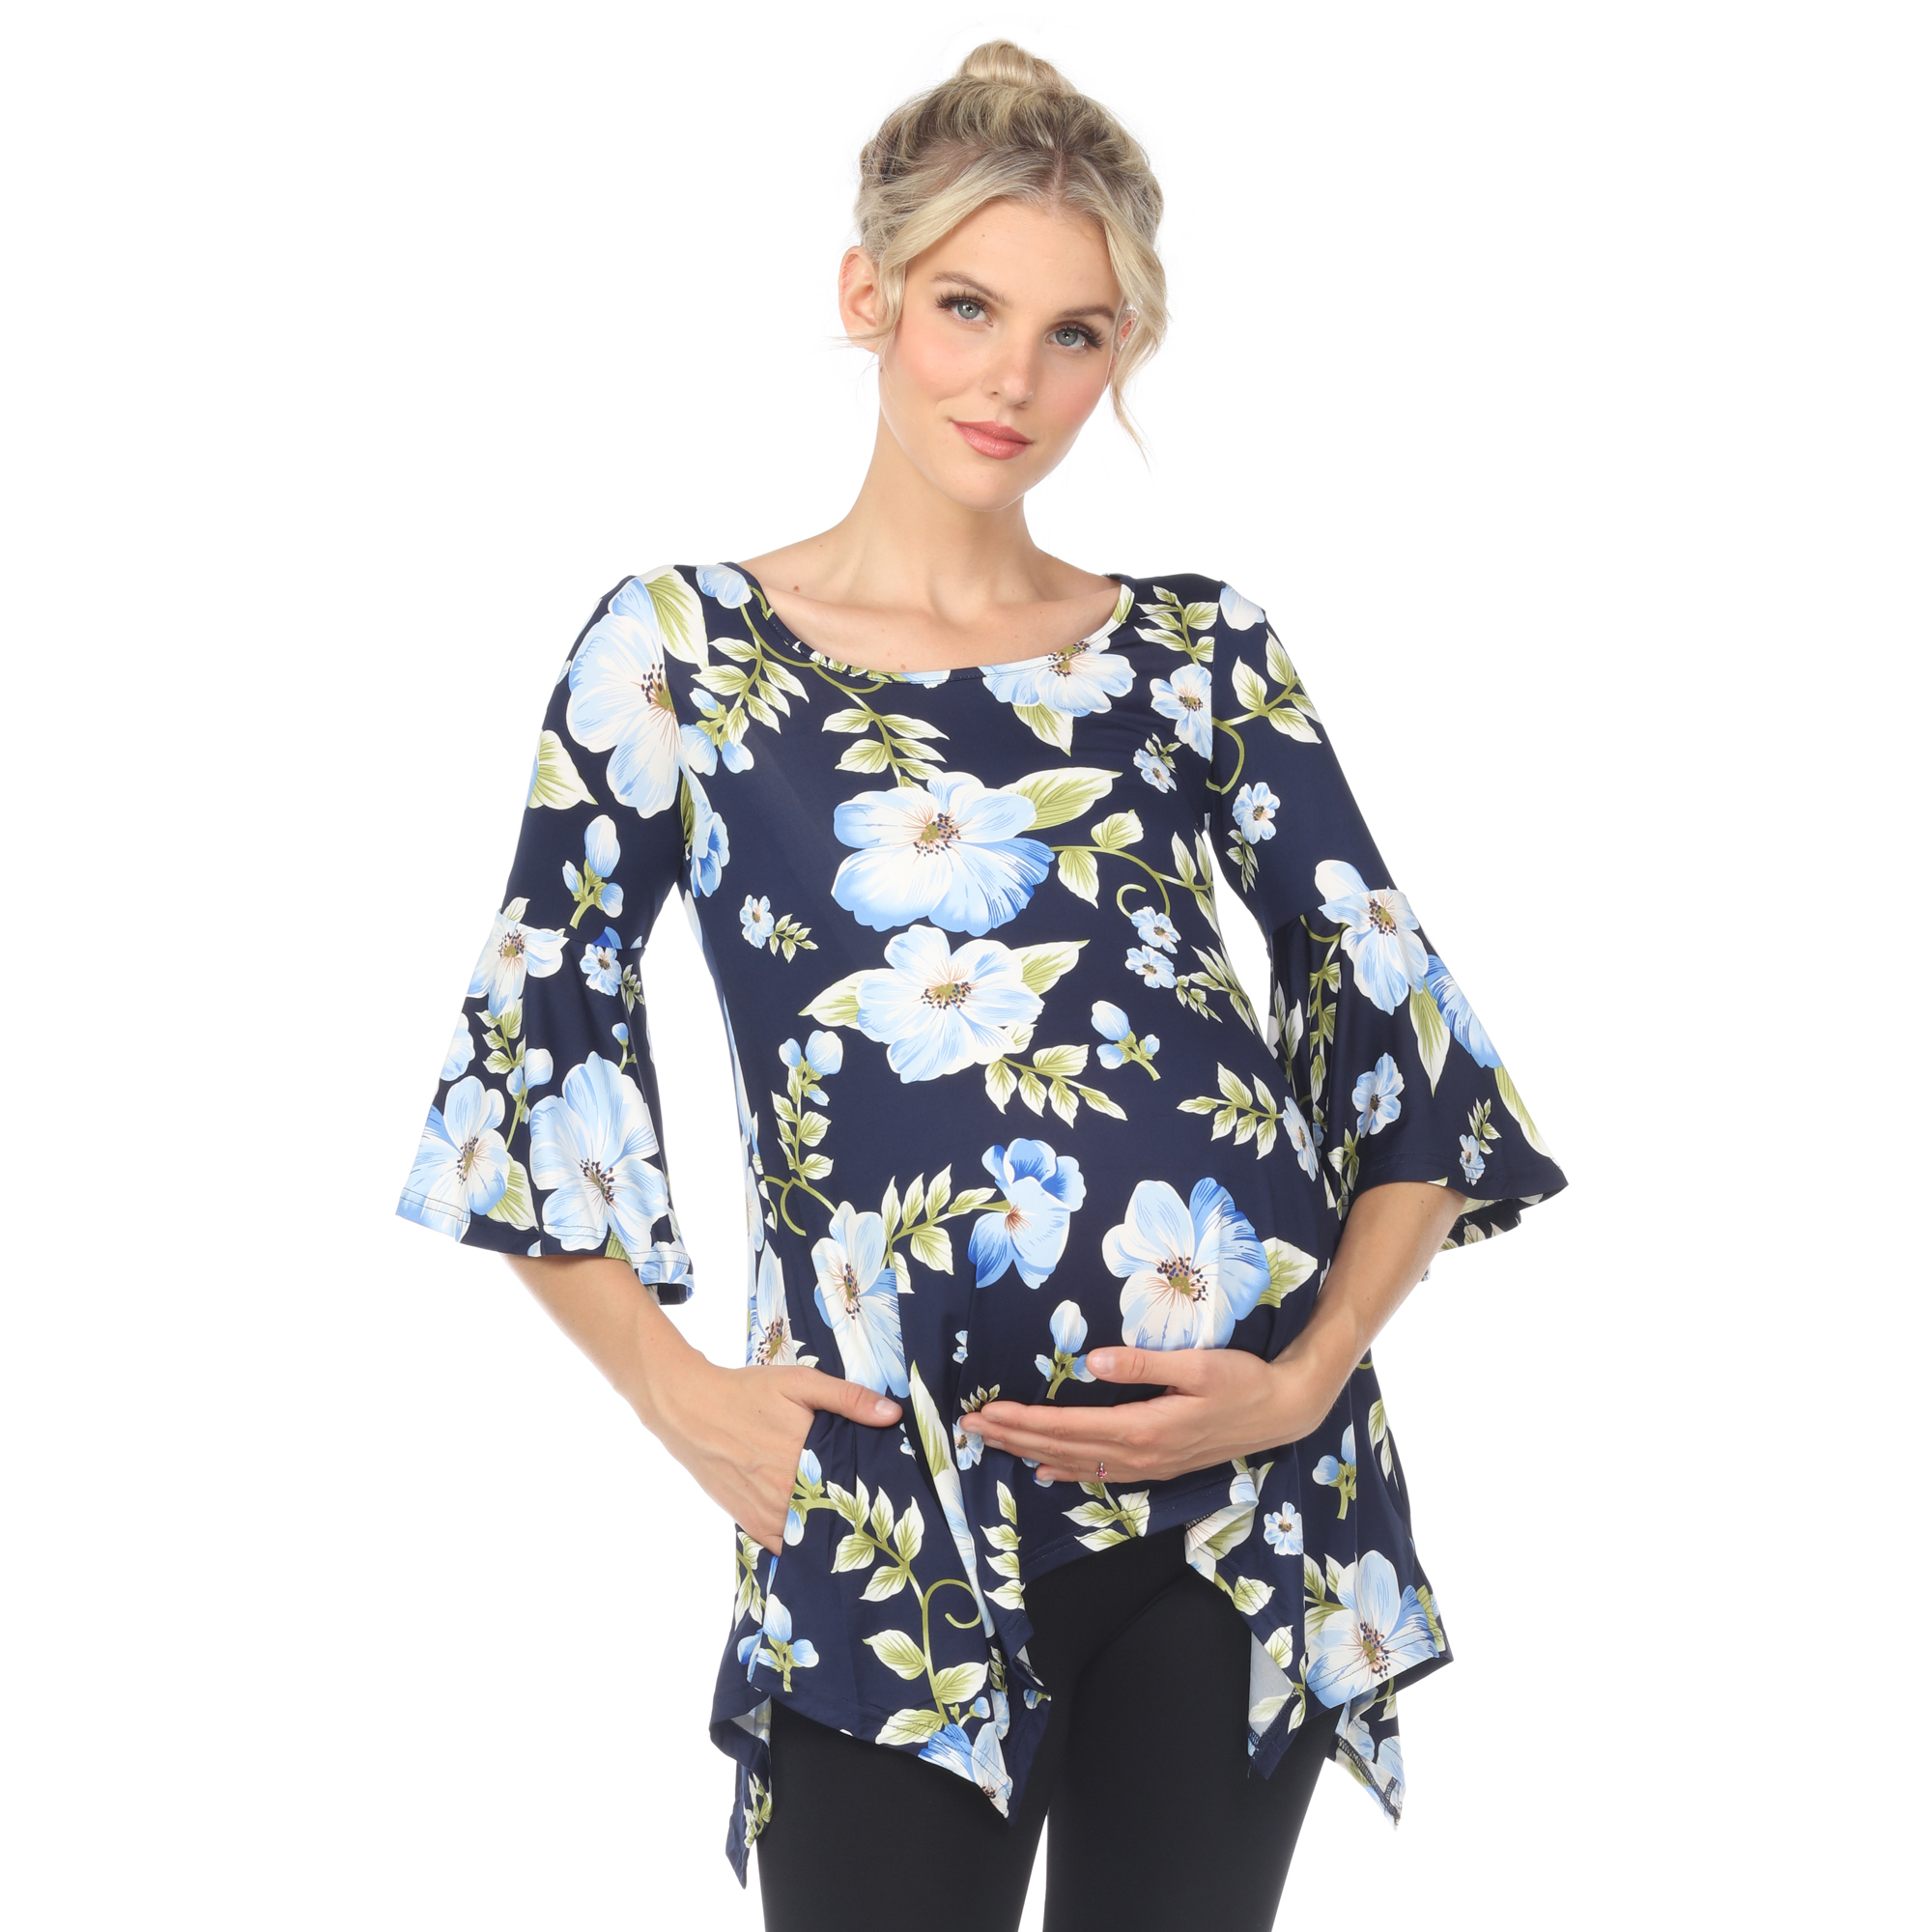 White Mark Women's Maternity Floral Print Quarter Sleeve Tunic Top With Pockets - Blue Flower, 2X